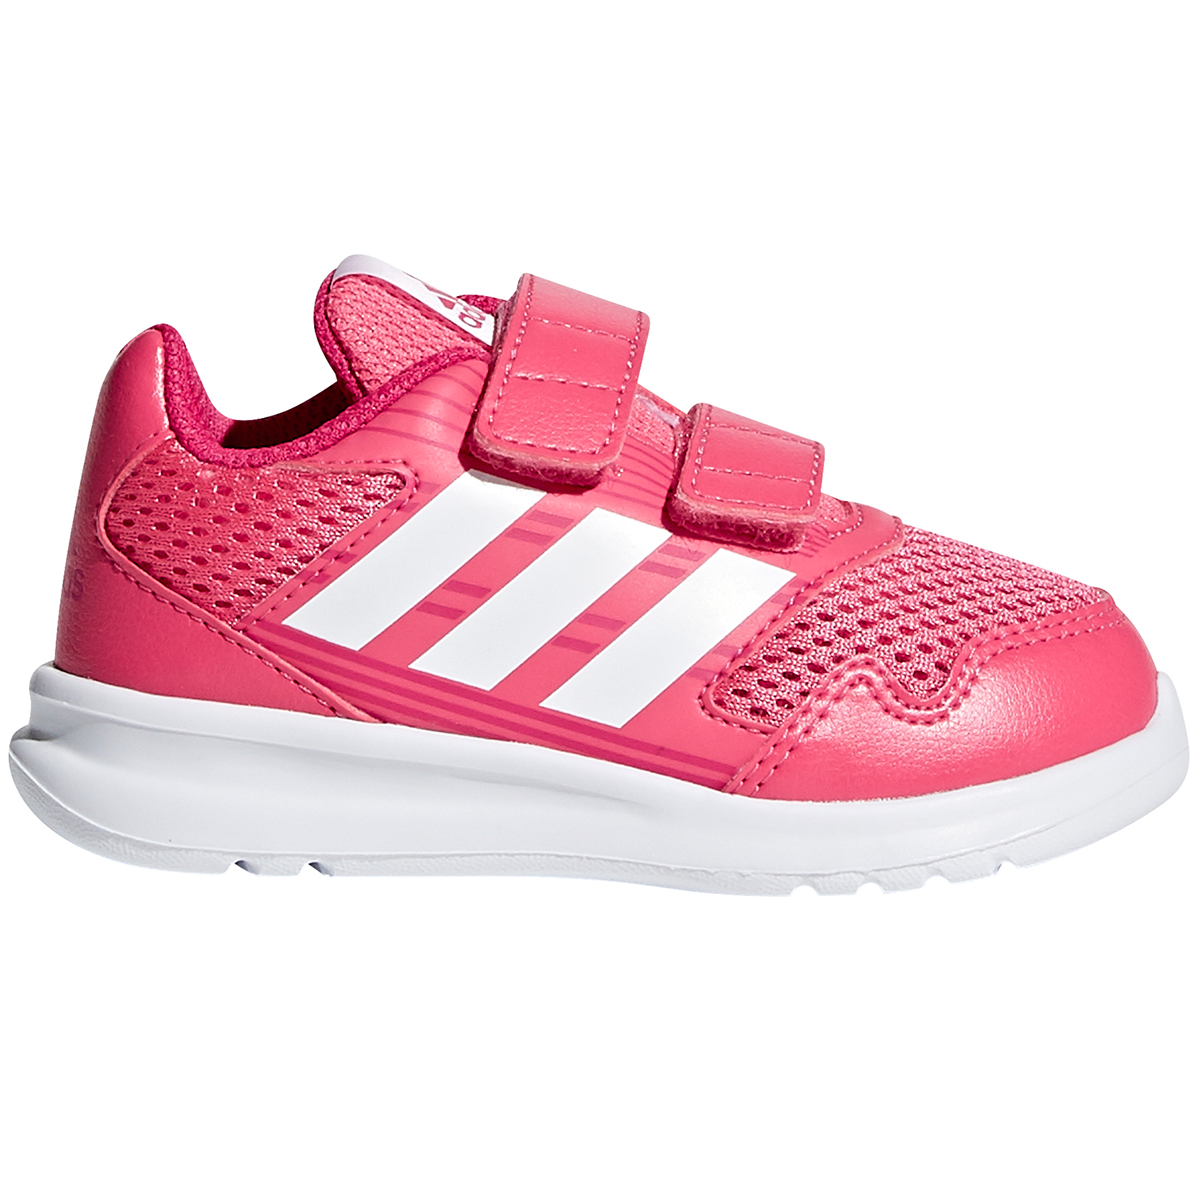 Adidas Infant Girls' Altarun Shoes - Red, 7